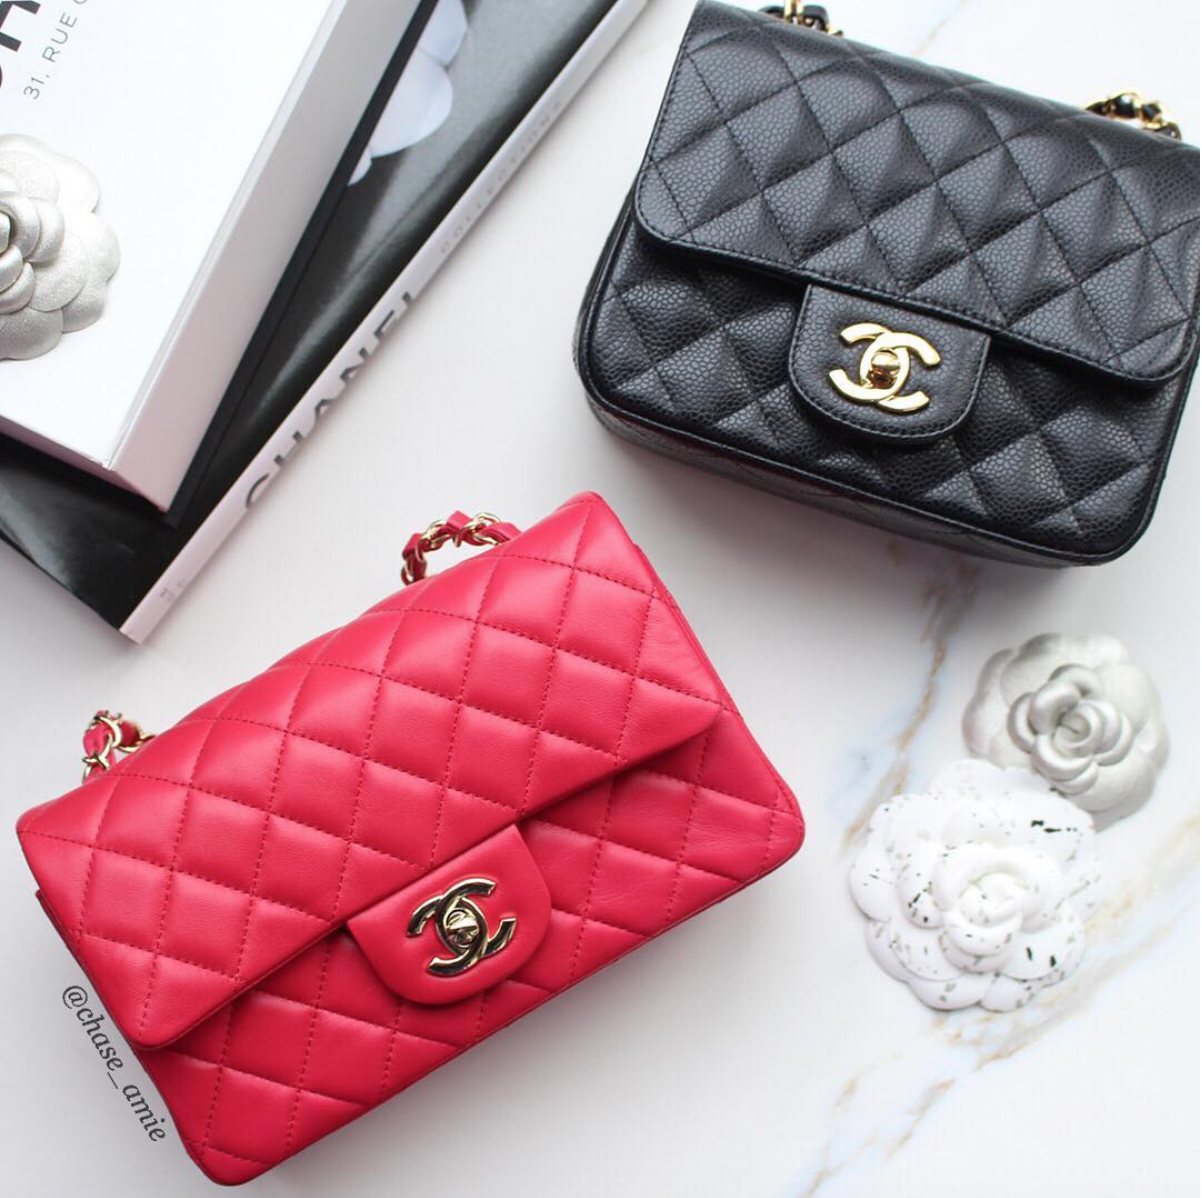 Preowned Chanel Handbags  Shop Prestige for best preloved prices